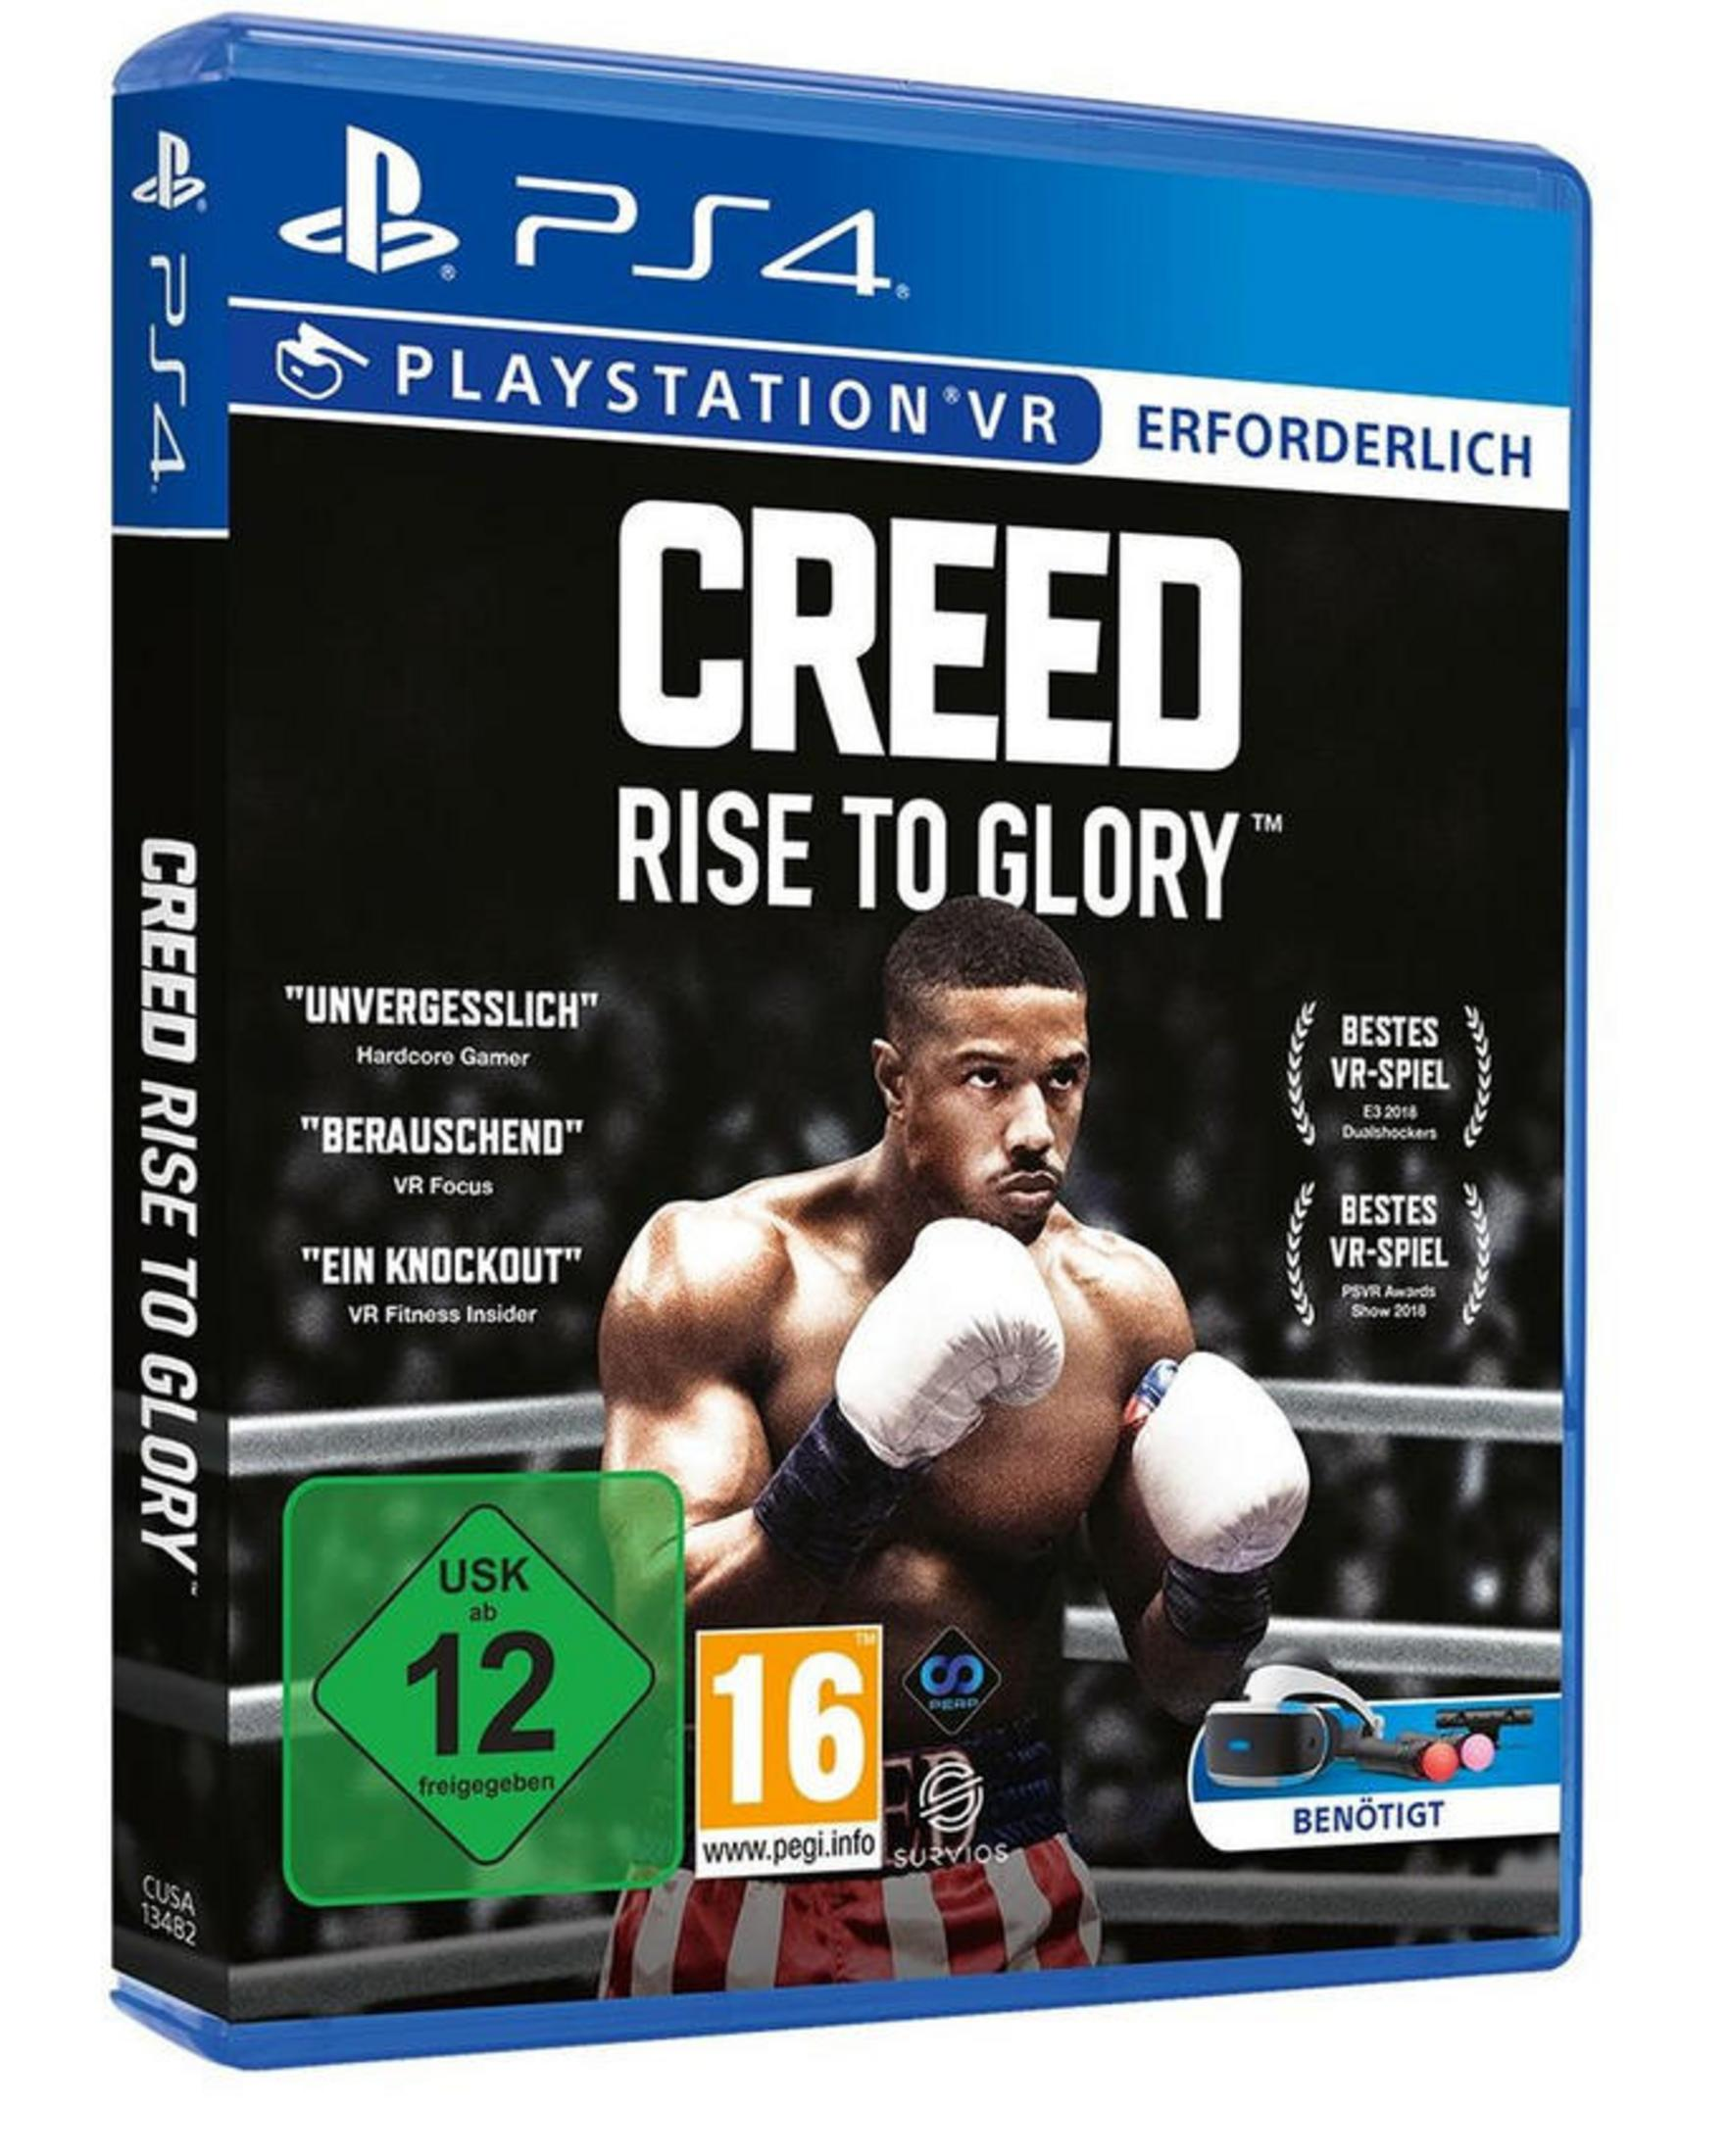 PS-4 Creed: Glory 4] - to Rise [PlayStation VR